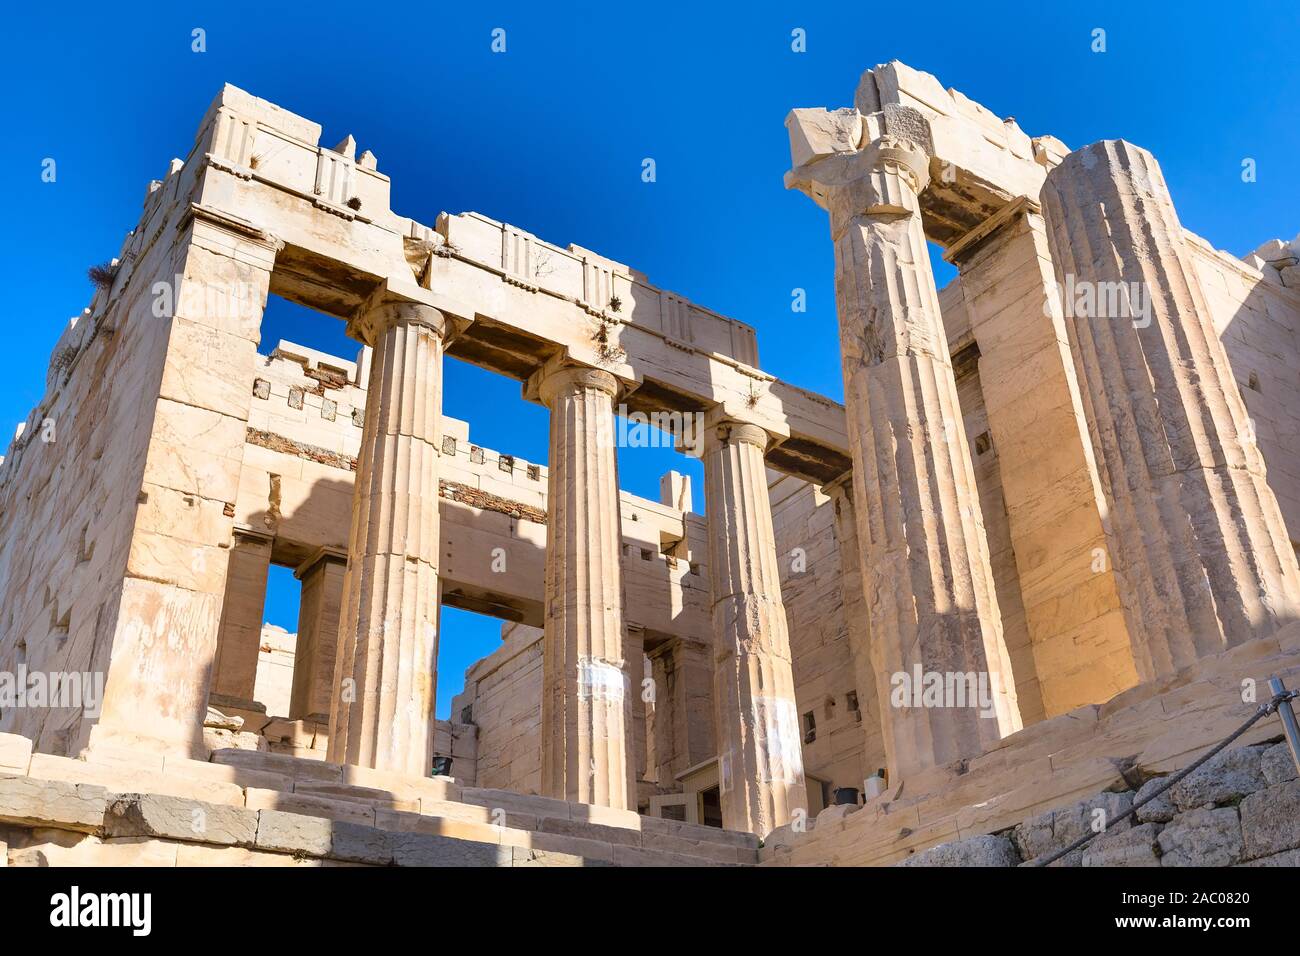 Ancient details of temple ruins in Acropolis, Greece Stock Photo